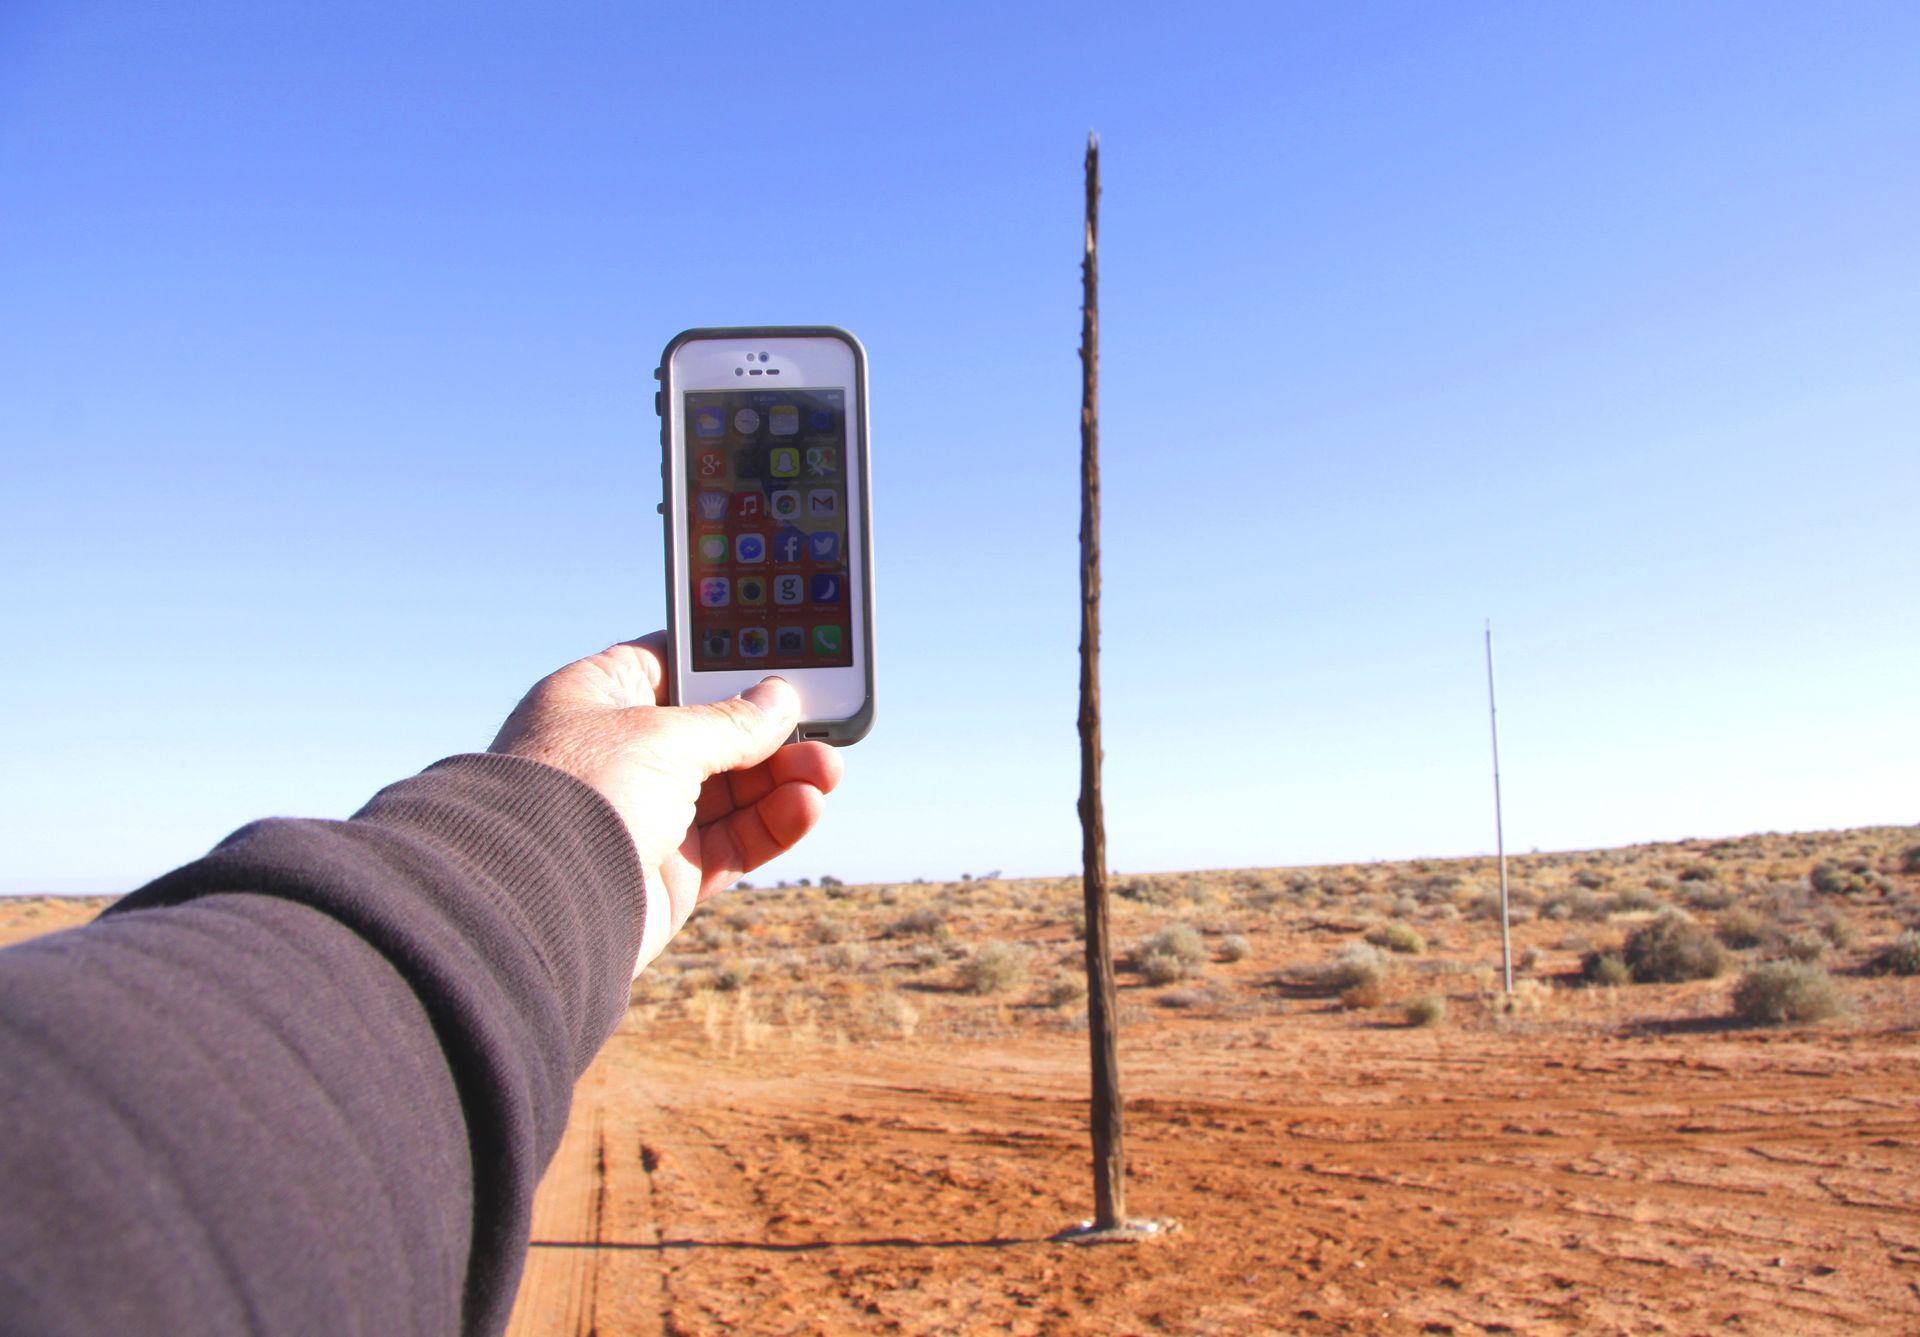 A modern cell phone is held up in front of an old telegraph pole in the Australian Outback. The cell phone is a stark contrast to the old telegraph pole, which is a reminder of the past. The image captures the juxtaposition of old and new technology in the Australian Outback.